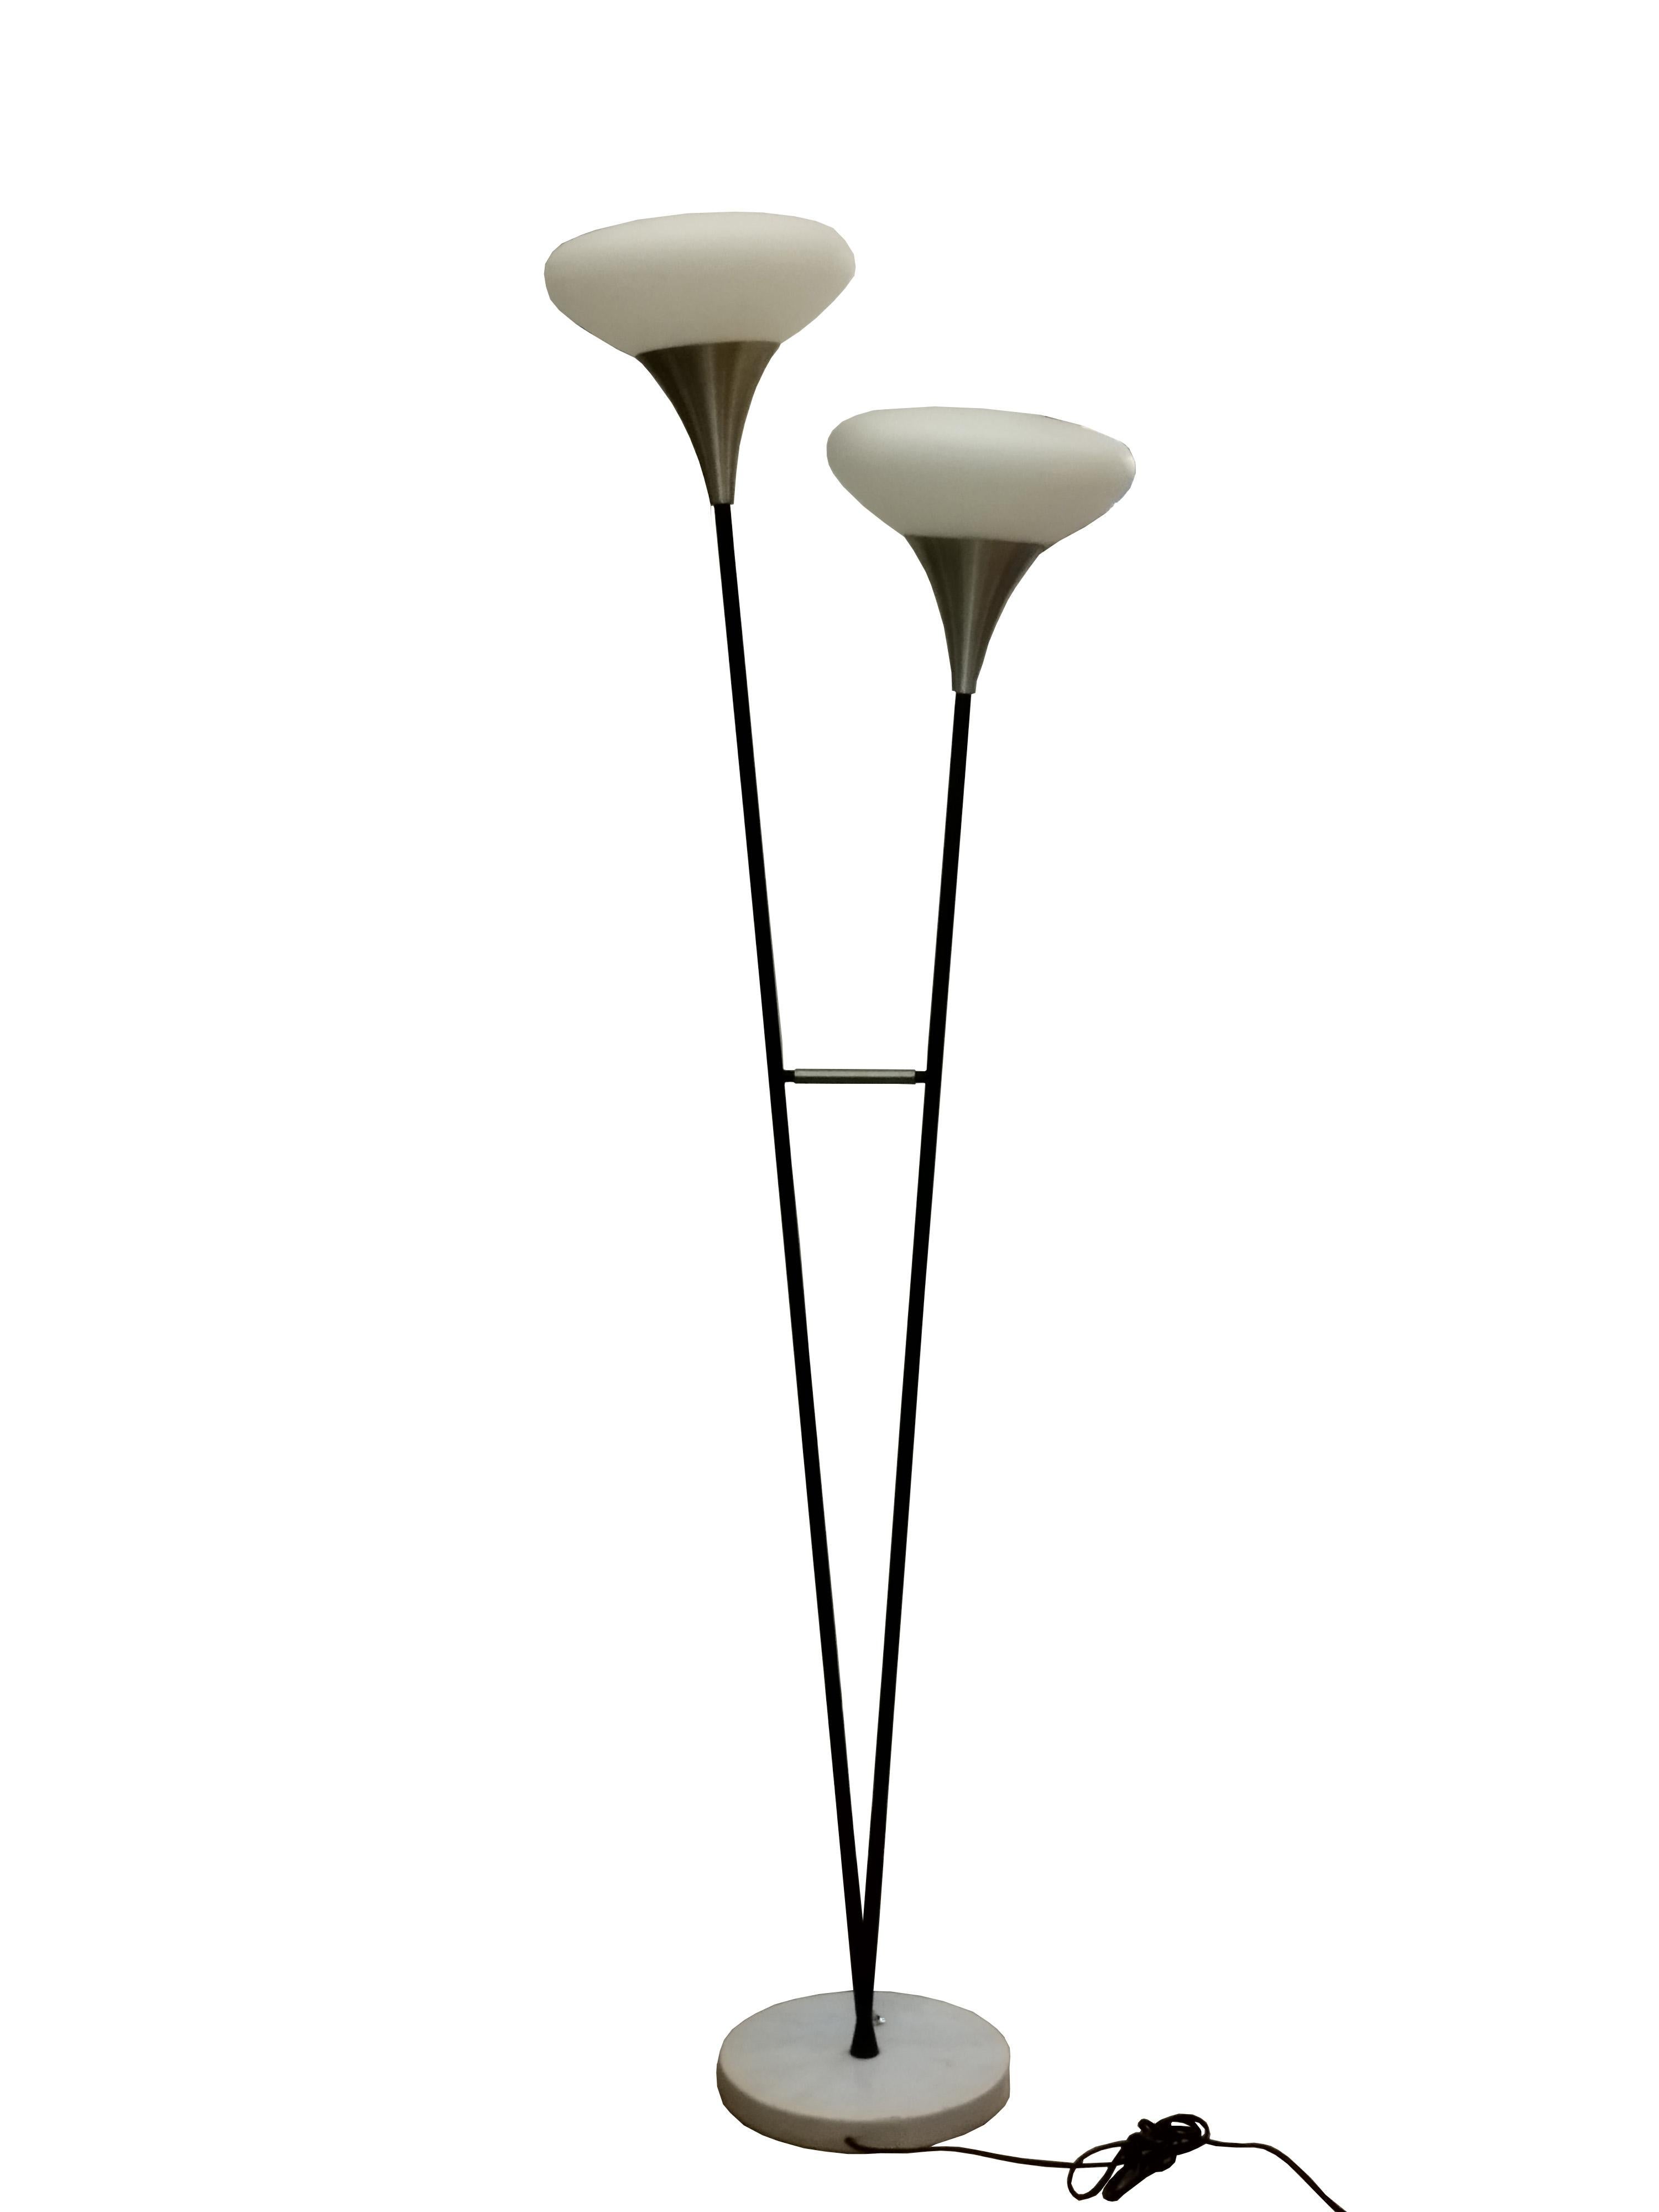 Italian floor lamp Produced by Stilnovo in the 1950s.
Featuring two black enameled upright branches, each with a white sandblasted opaline glass shade on a marble base.
  